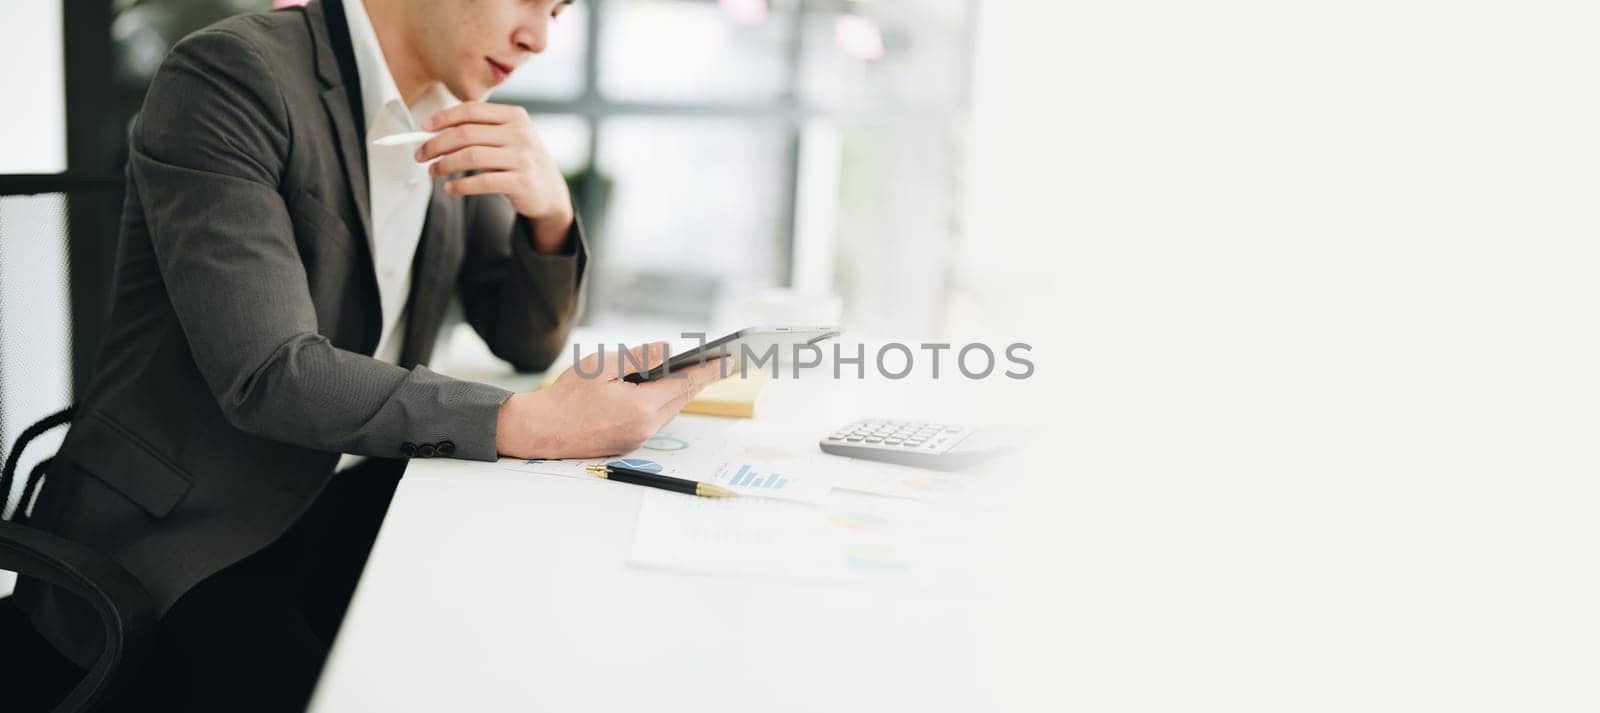 Portrait of a young Asian man showing a smiling face as she uses his phone, computer and financial documents on her desk in the early morning hours.